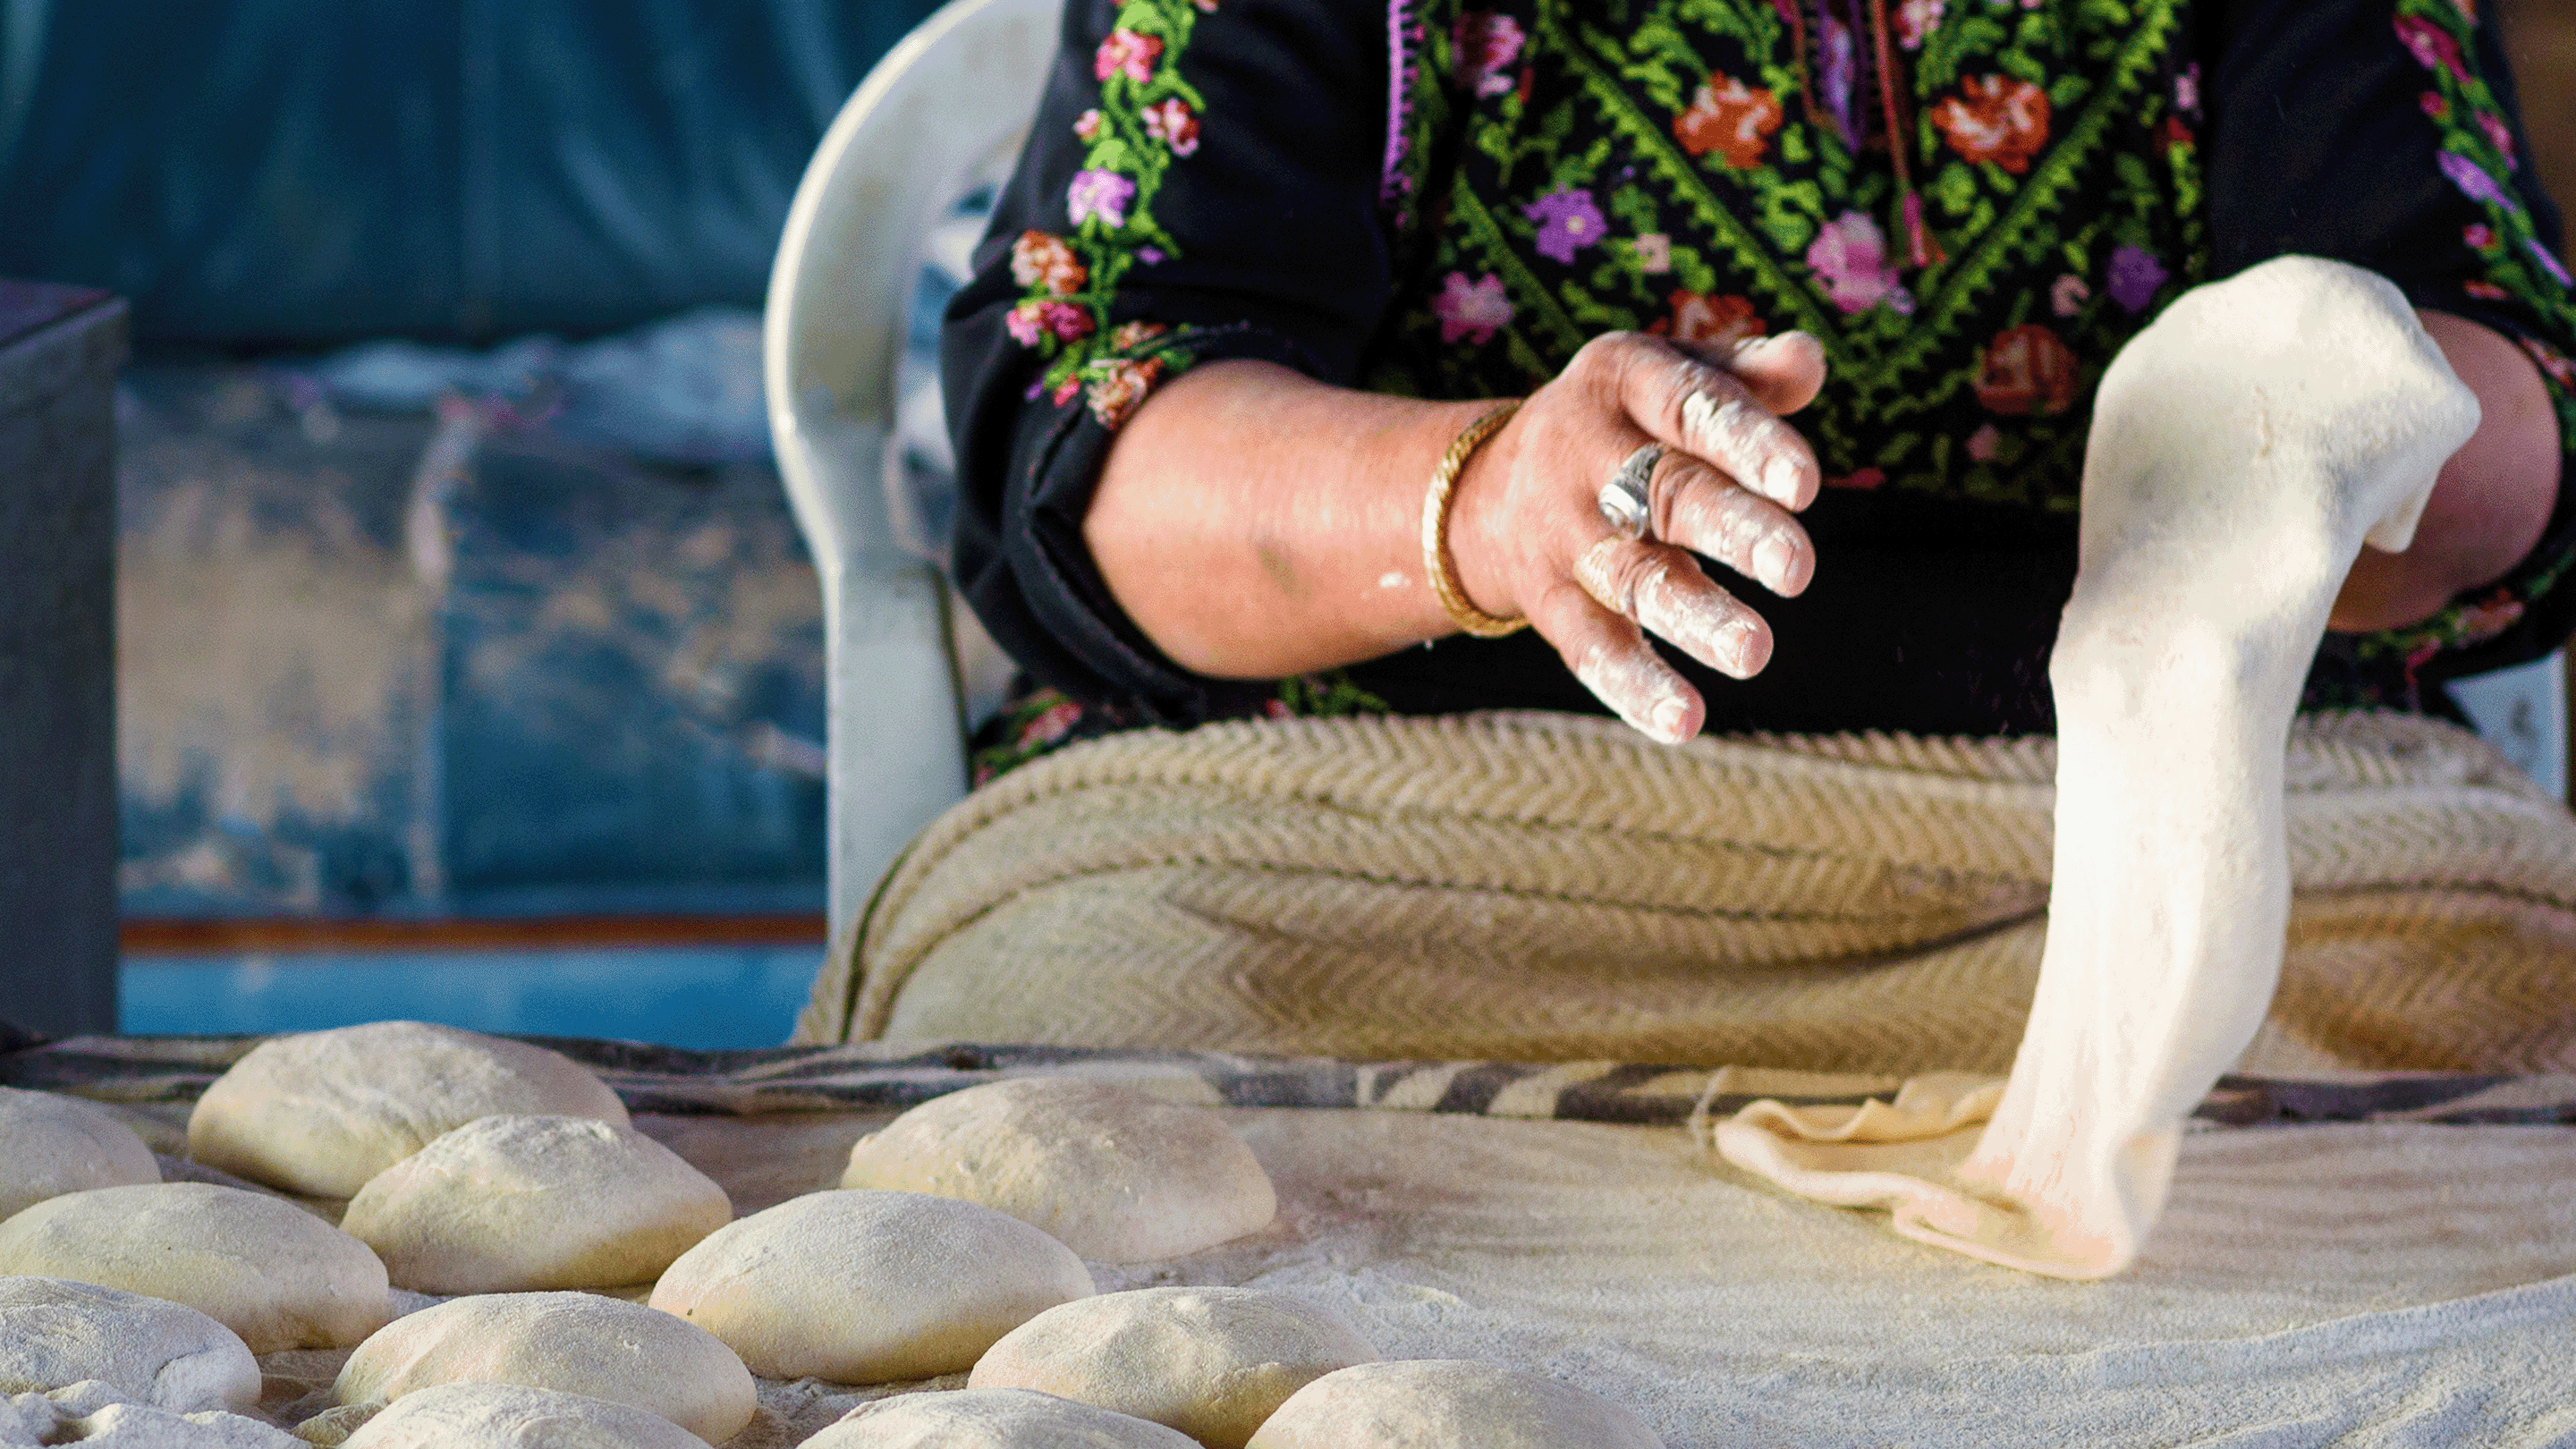 close up of woman'a hands kneading dough